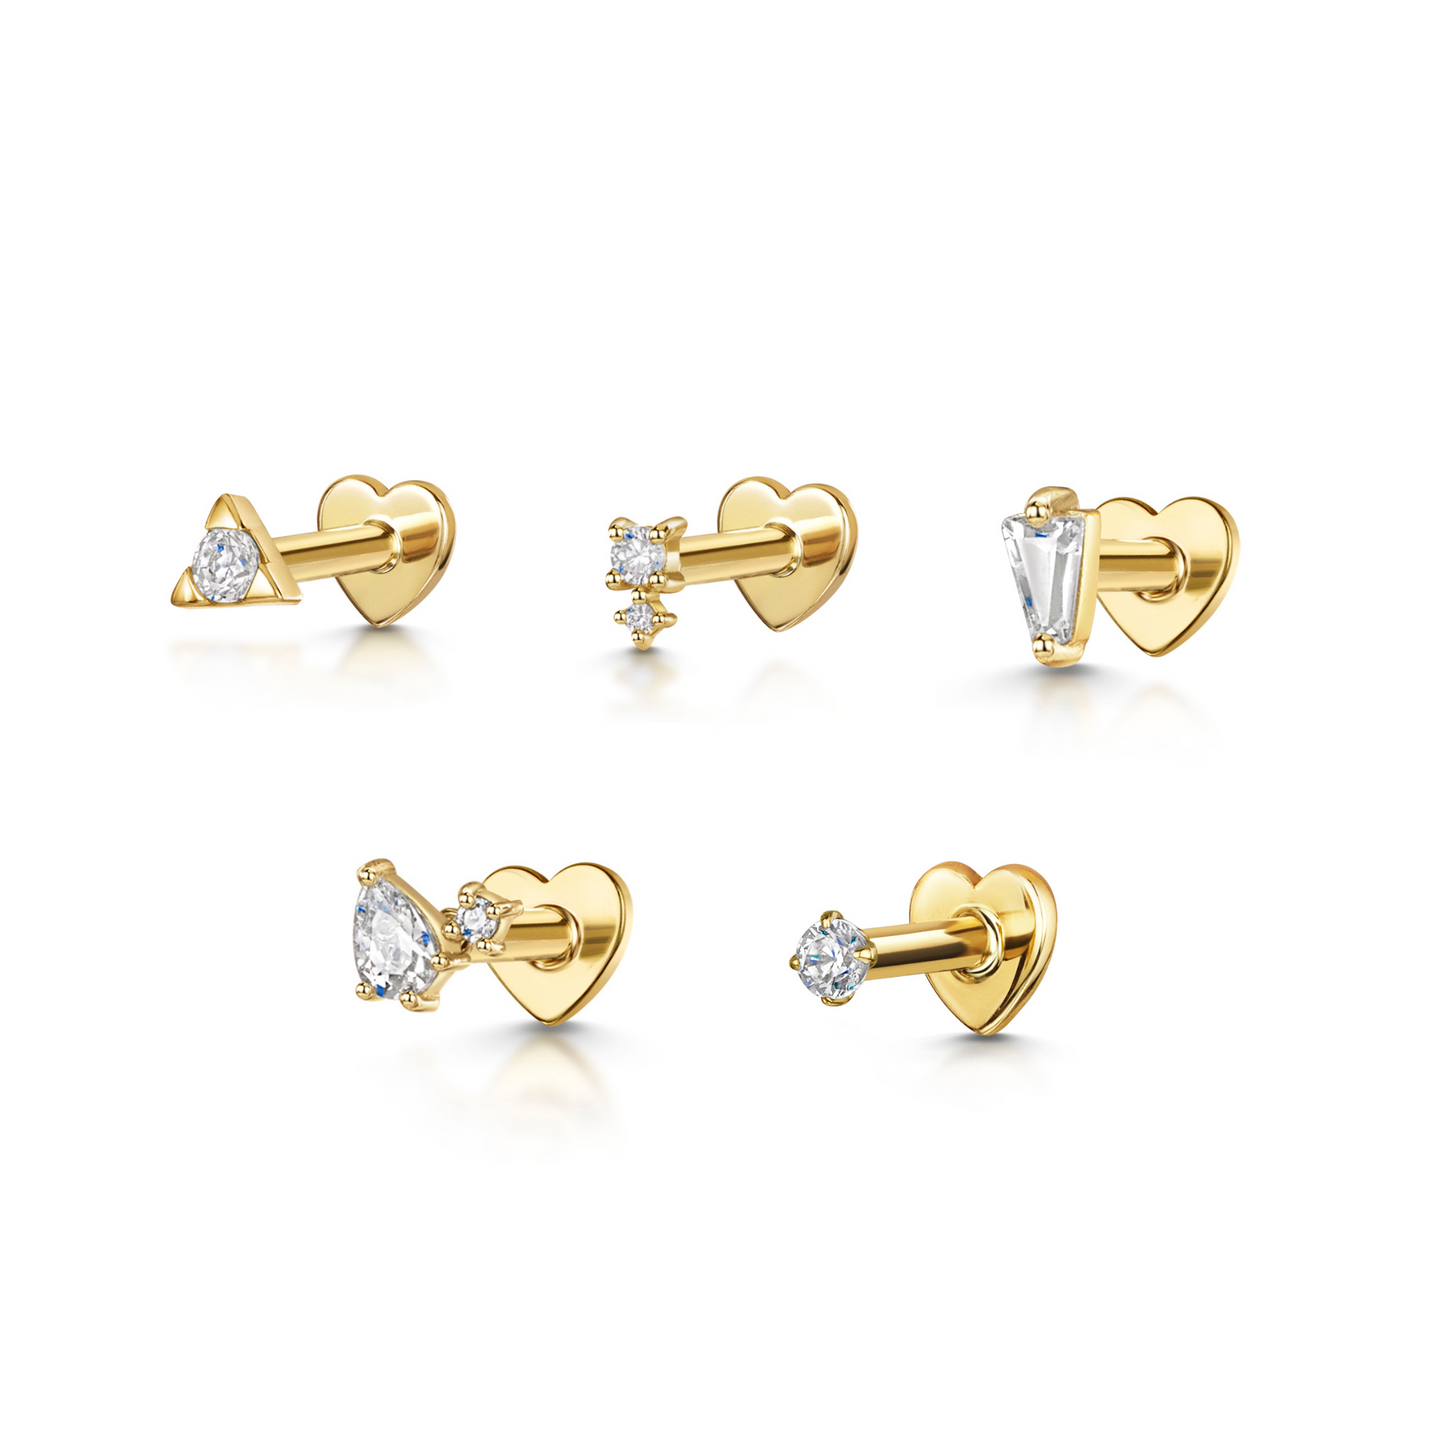 The dazzling stacking set - 9k solid yellow gold flat back labret stud earring set